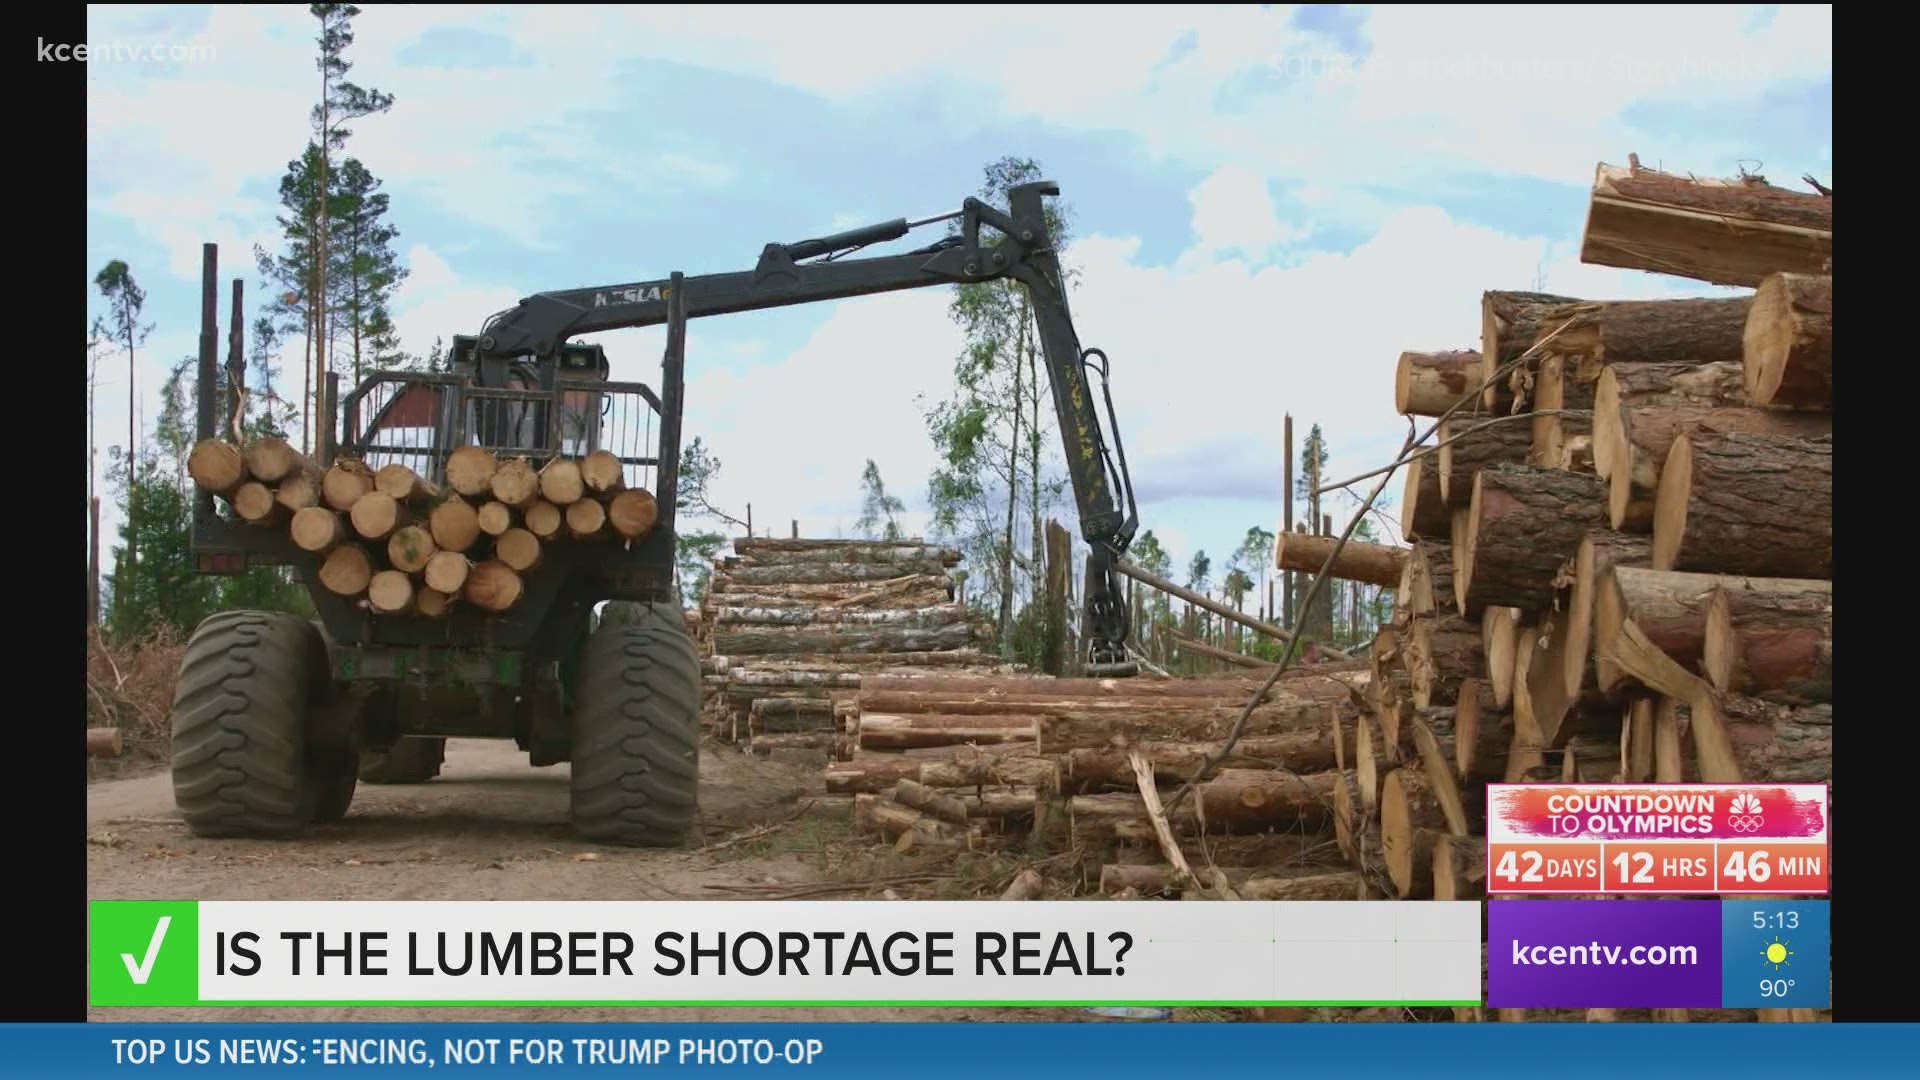 A video on TikTok claims the lumber shortage is fake, so our Verify team wanted to look into the truth.